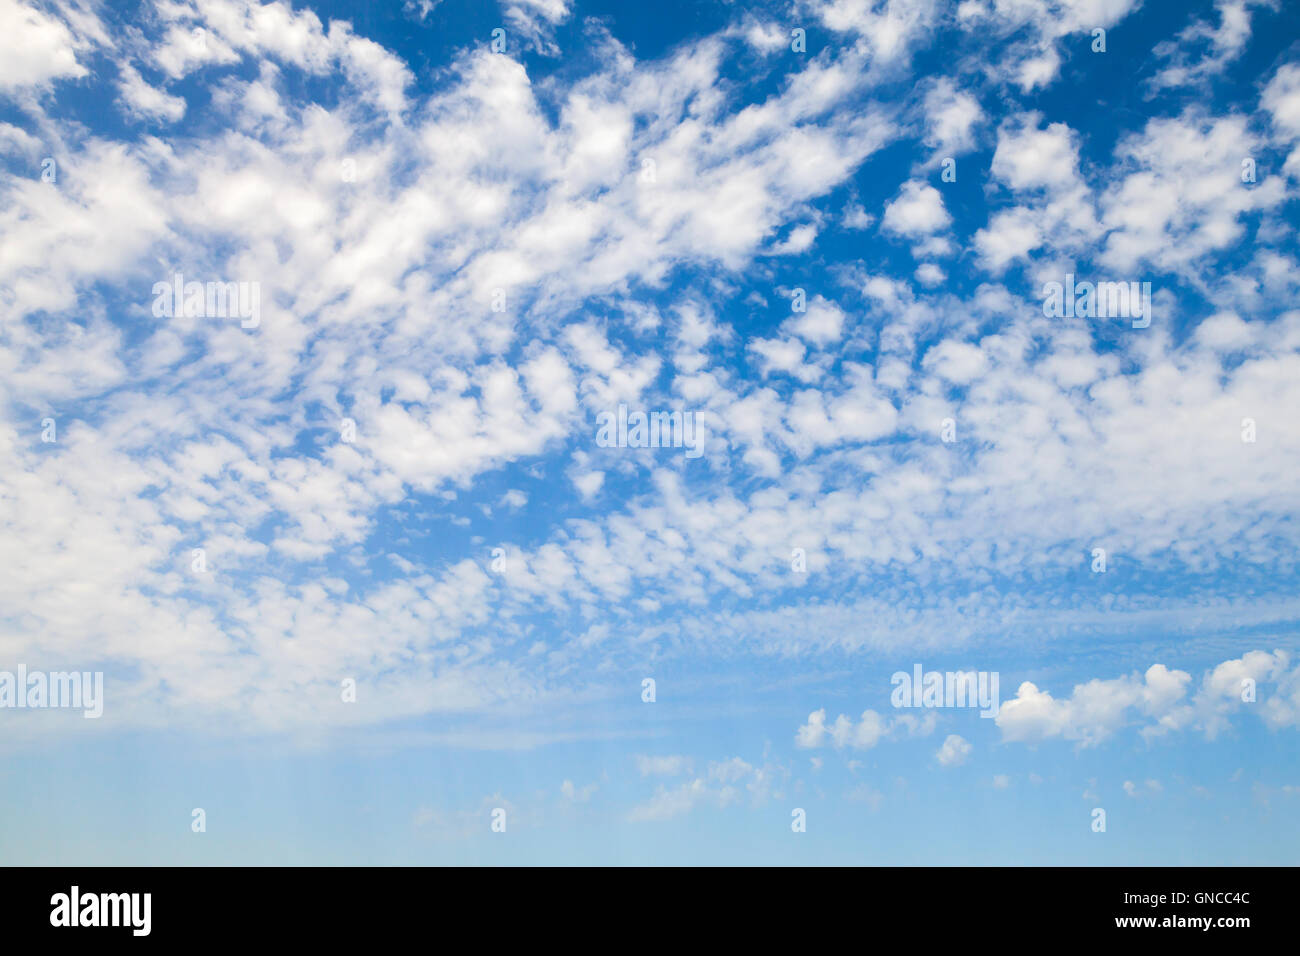 Natural blue sky with white altocumulus clouds, background photo texture Stock Photo